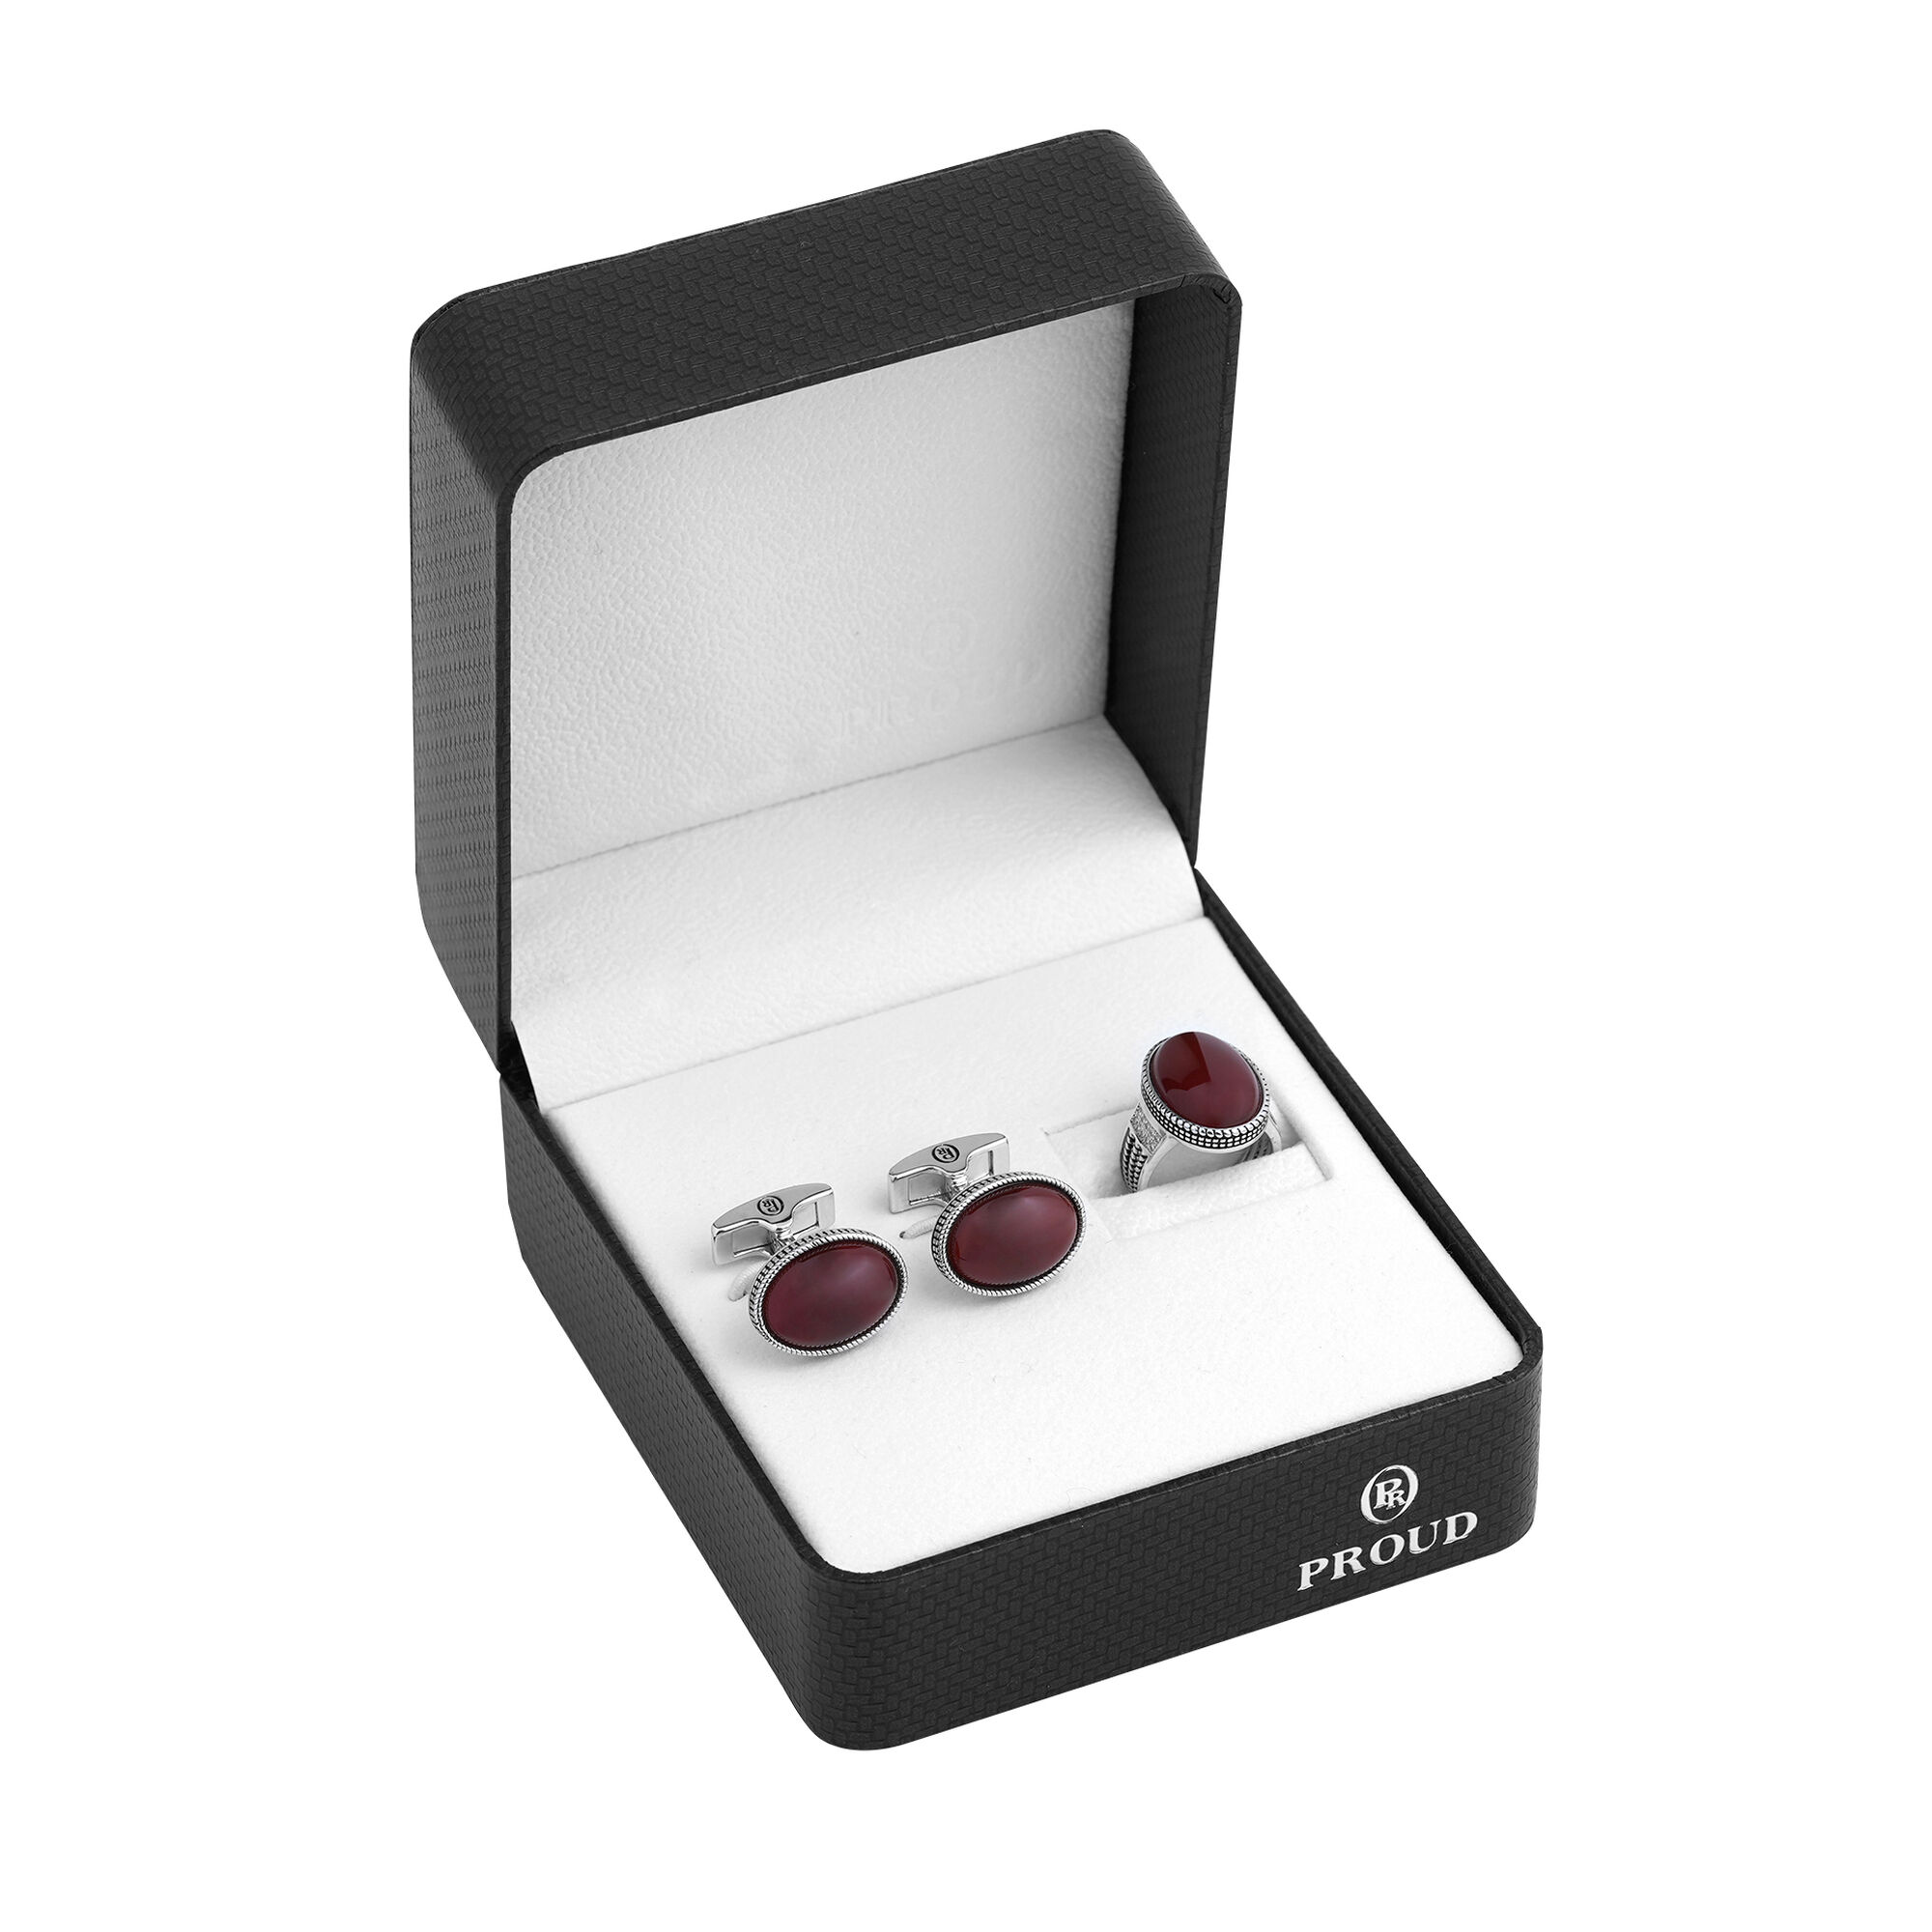 Box + R4357-C62-6-23 Silver Ring and Cufflinks Set